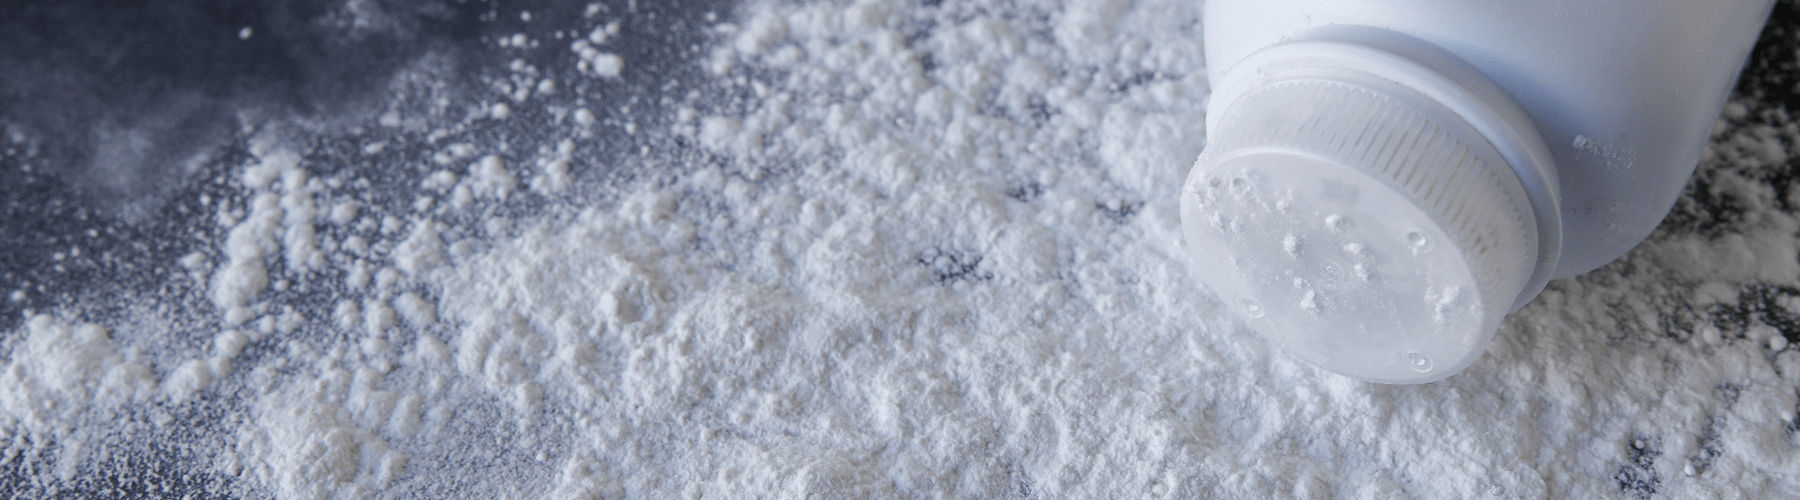 Johnson & Johnson Set to Discontinue Talc-Based Baby Powder Globally in 2023